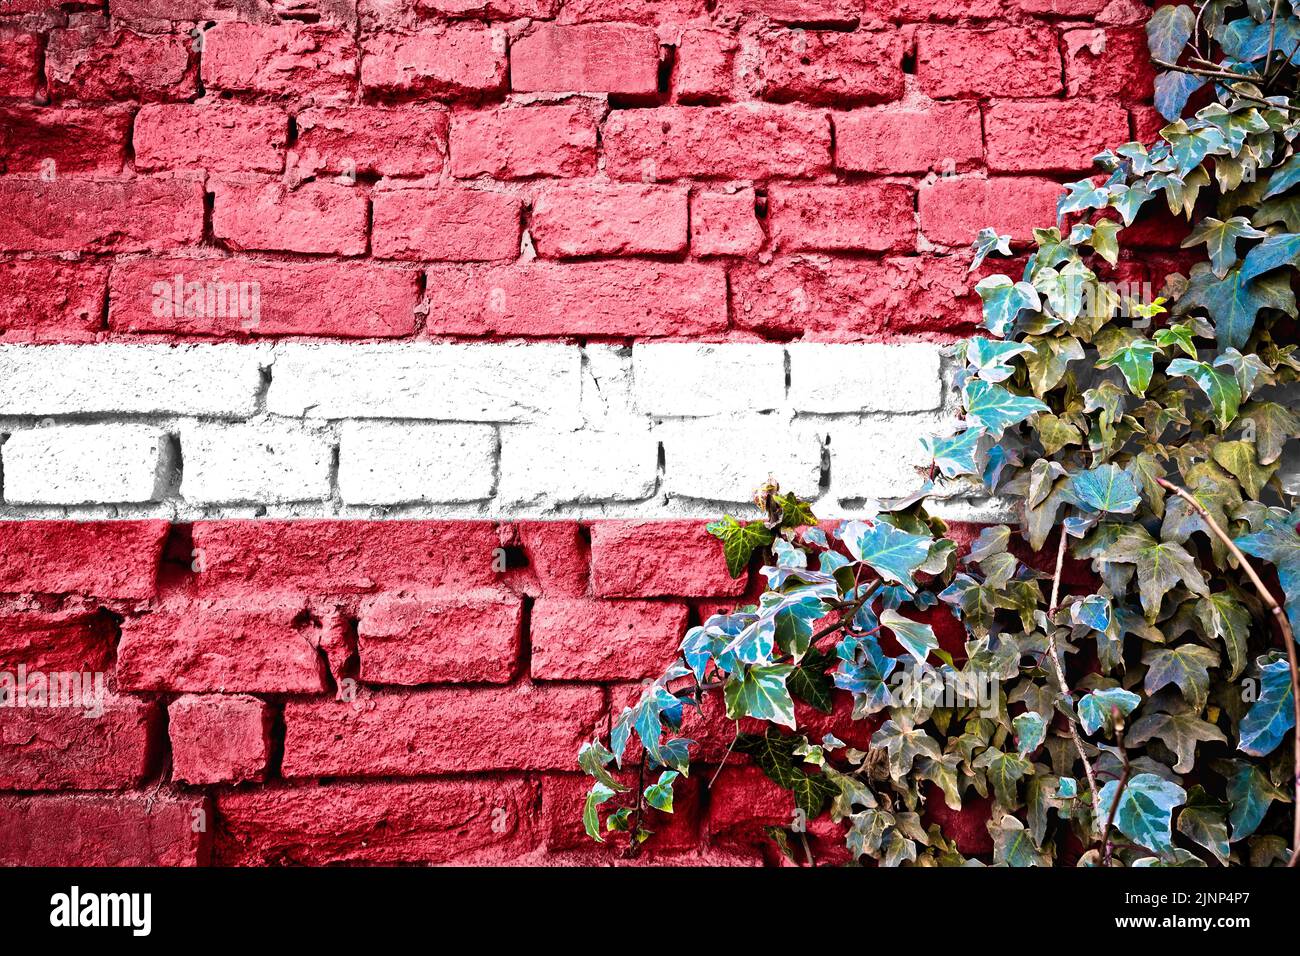 Latvia grunge flag on brick wall with ivy plant, country symbol concept Stock Photo